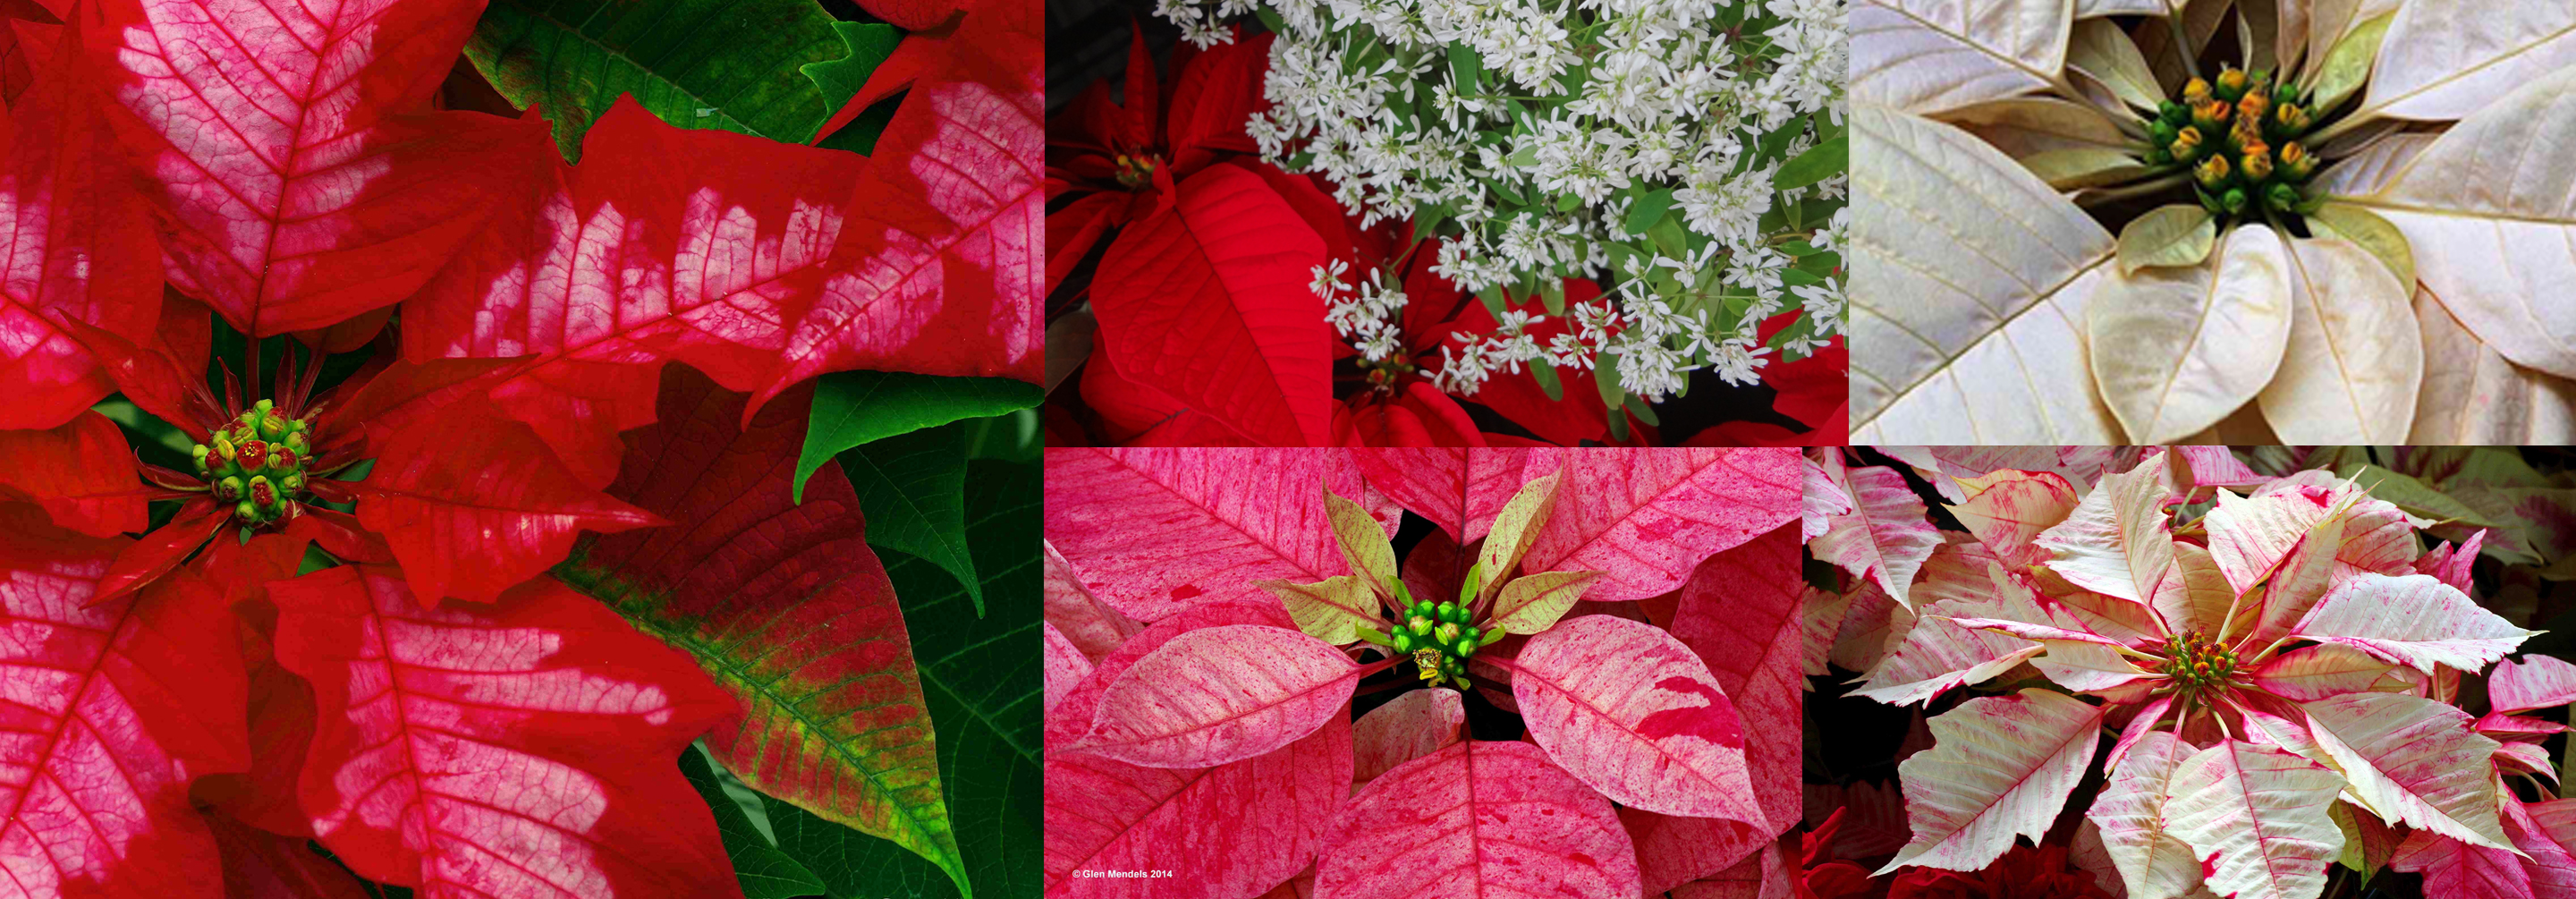 New Poinsettia Displays with Simple Decor